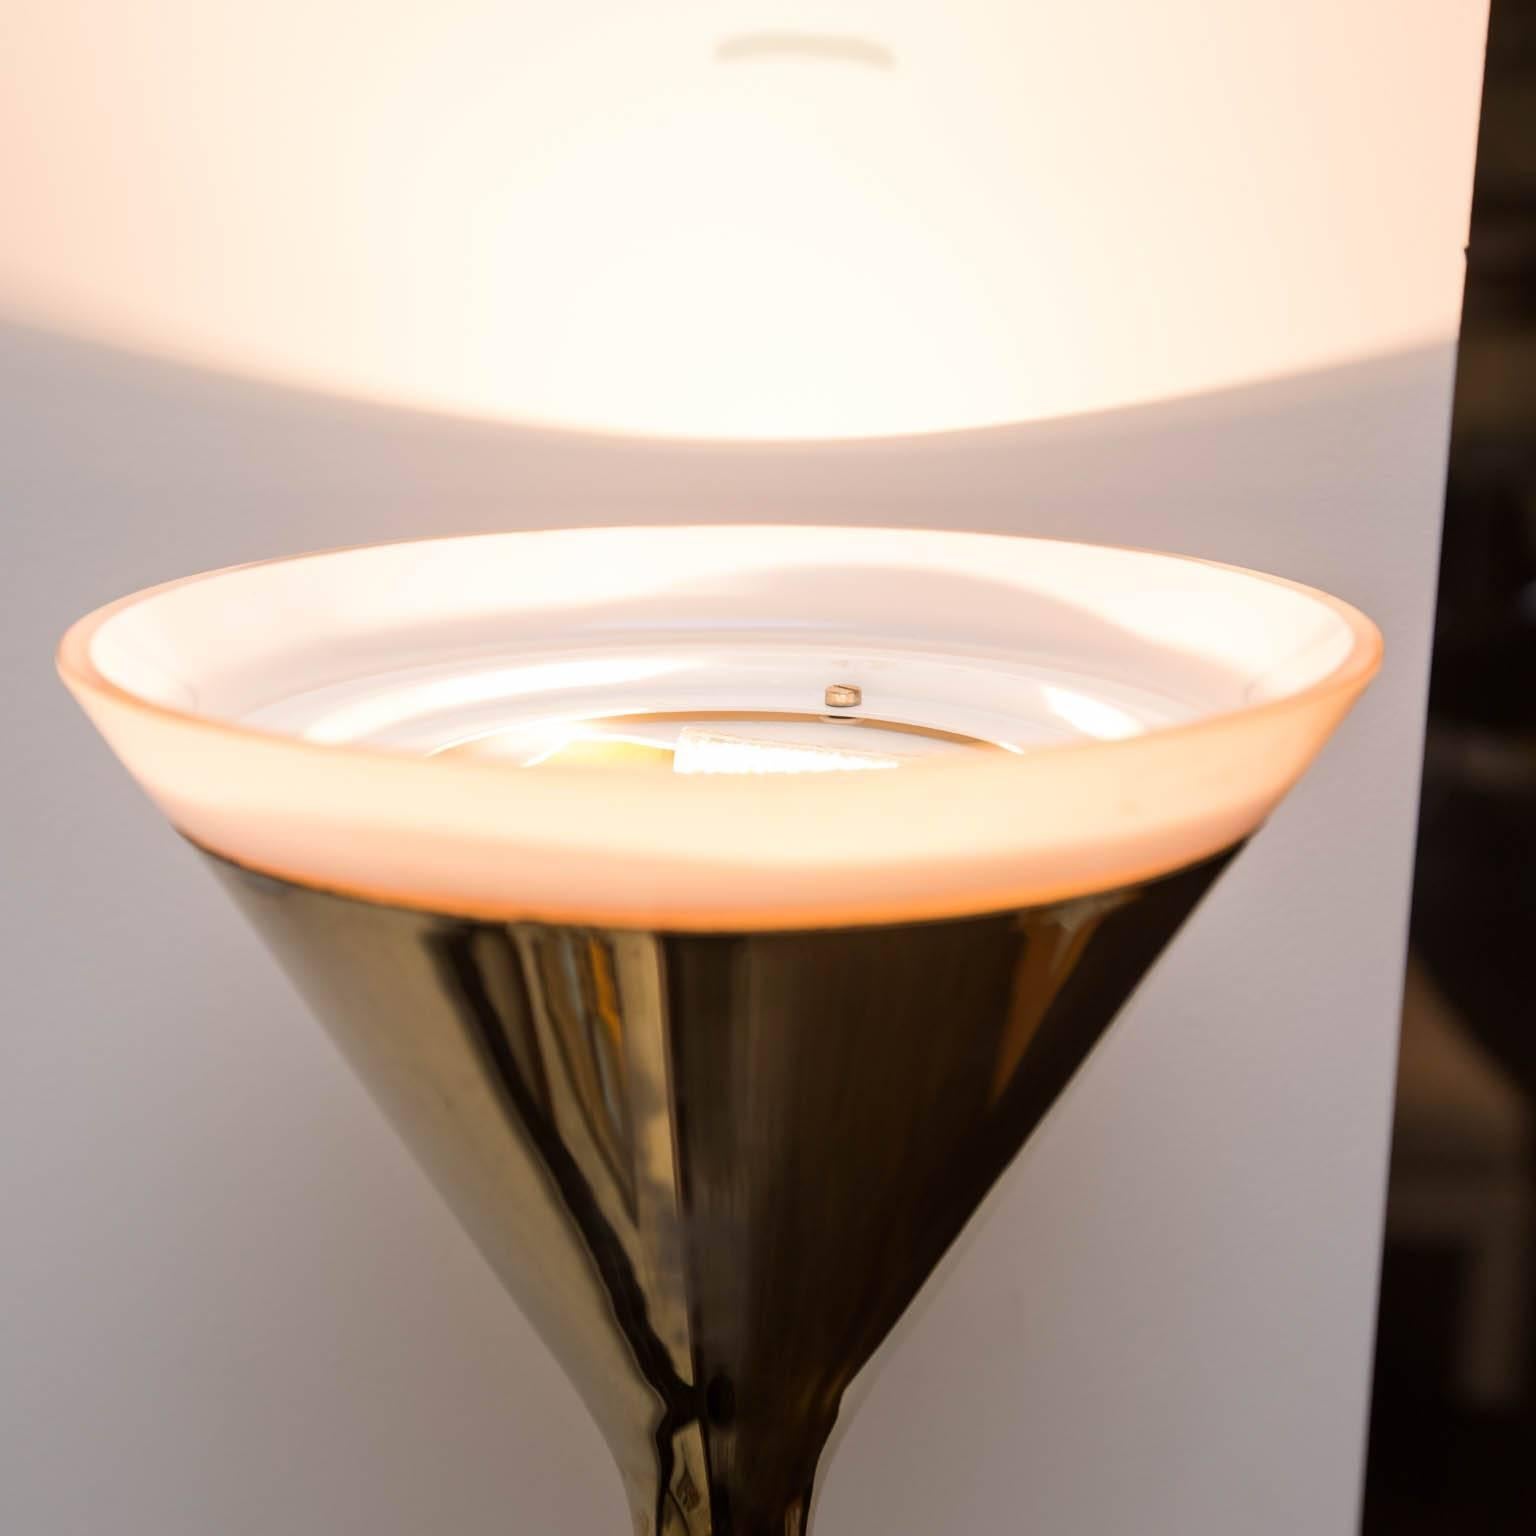 Reminiscent of Sonneman's lamps, but have I've never seen another one like this, with this elongated hourglass shape. Cast-aluminum with heavy brass plating that really shines and a cast iron form fitted weighted base. Rim of milk glass at top.